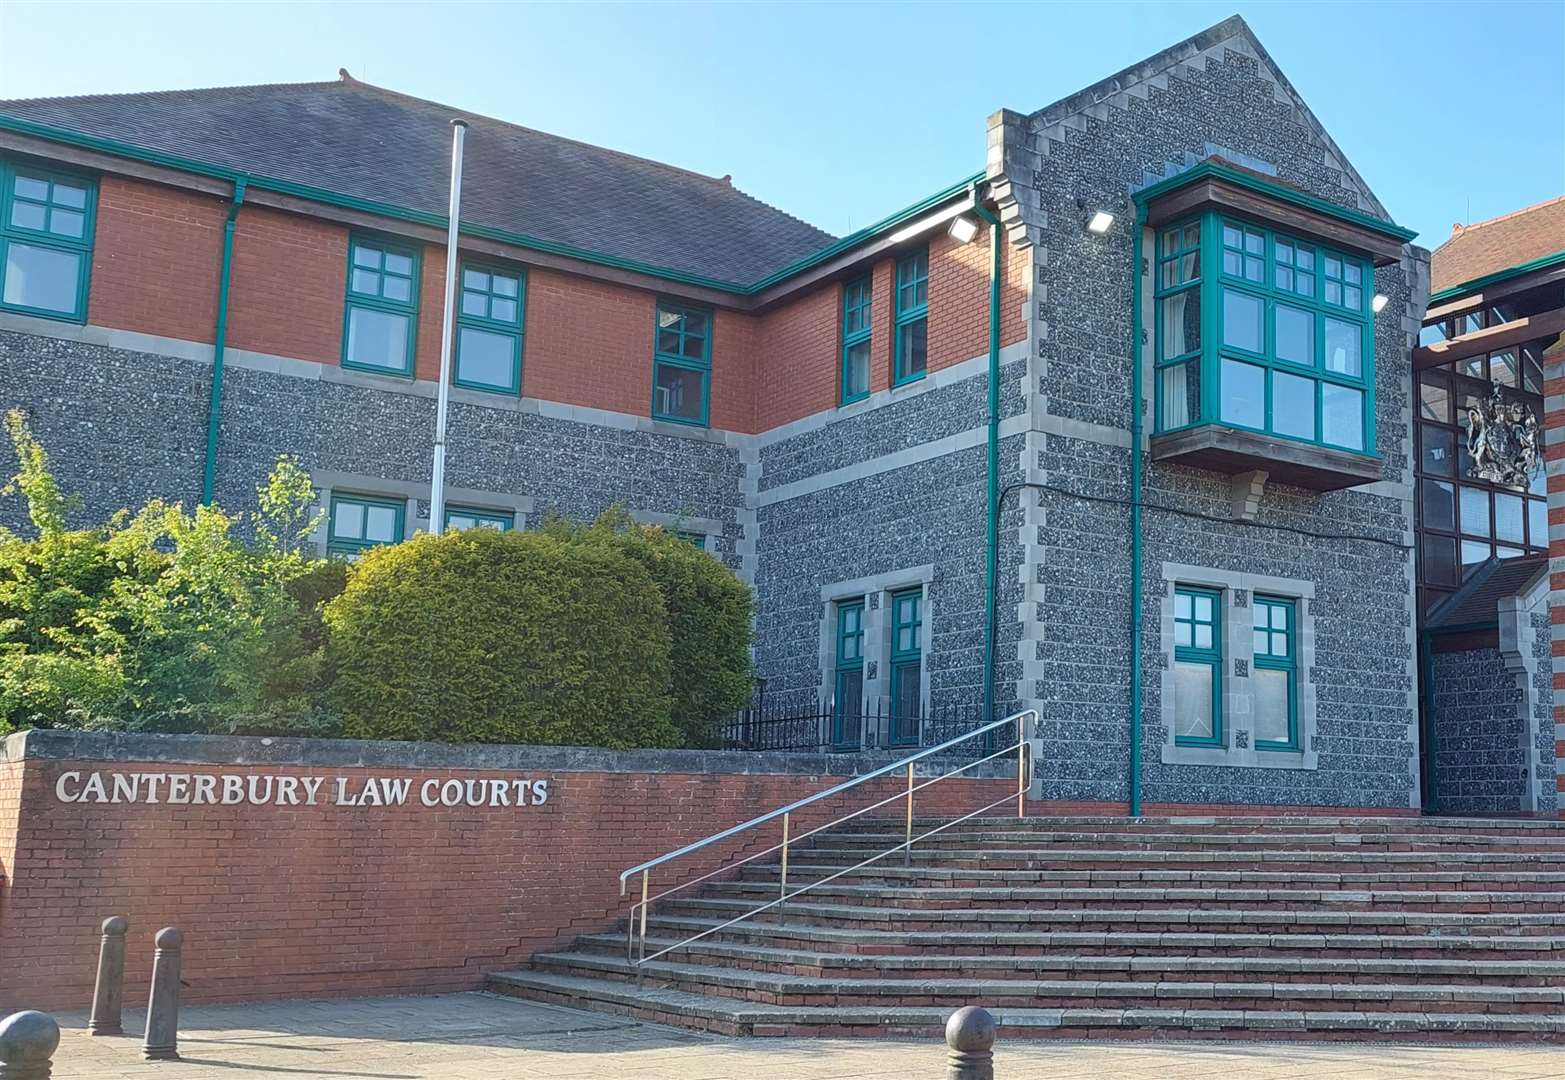 Michael Quilligan was sentenced at Canterbury Crown Court